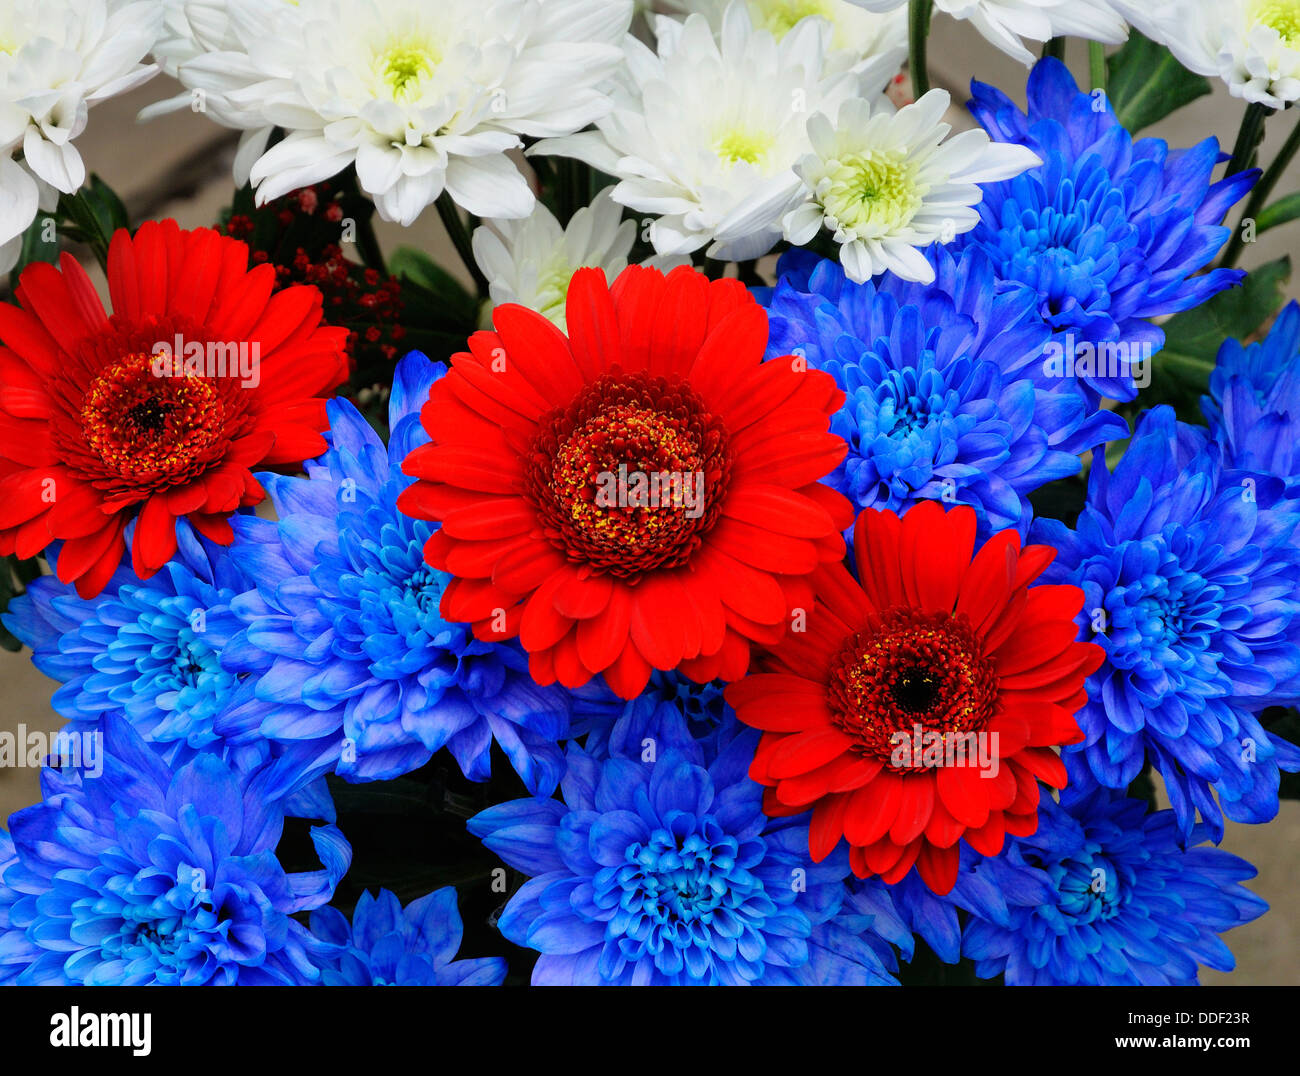 Red White And Blue Flowers Stock Photos Red White And Blue